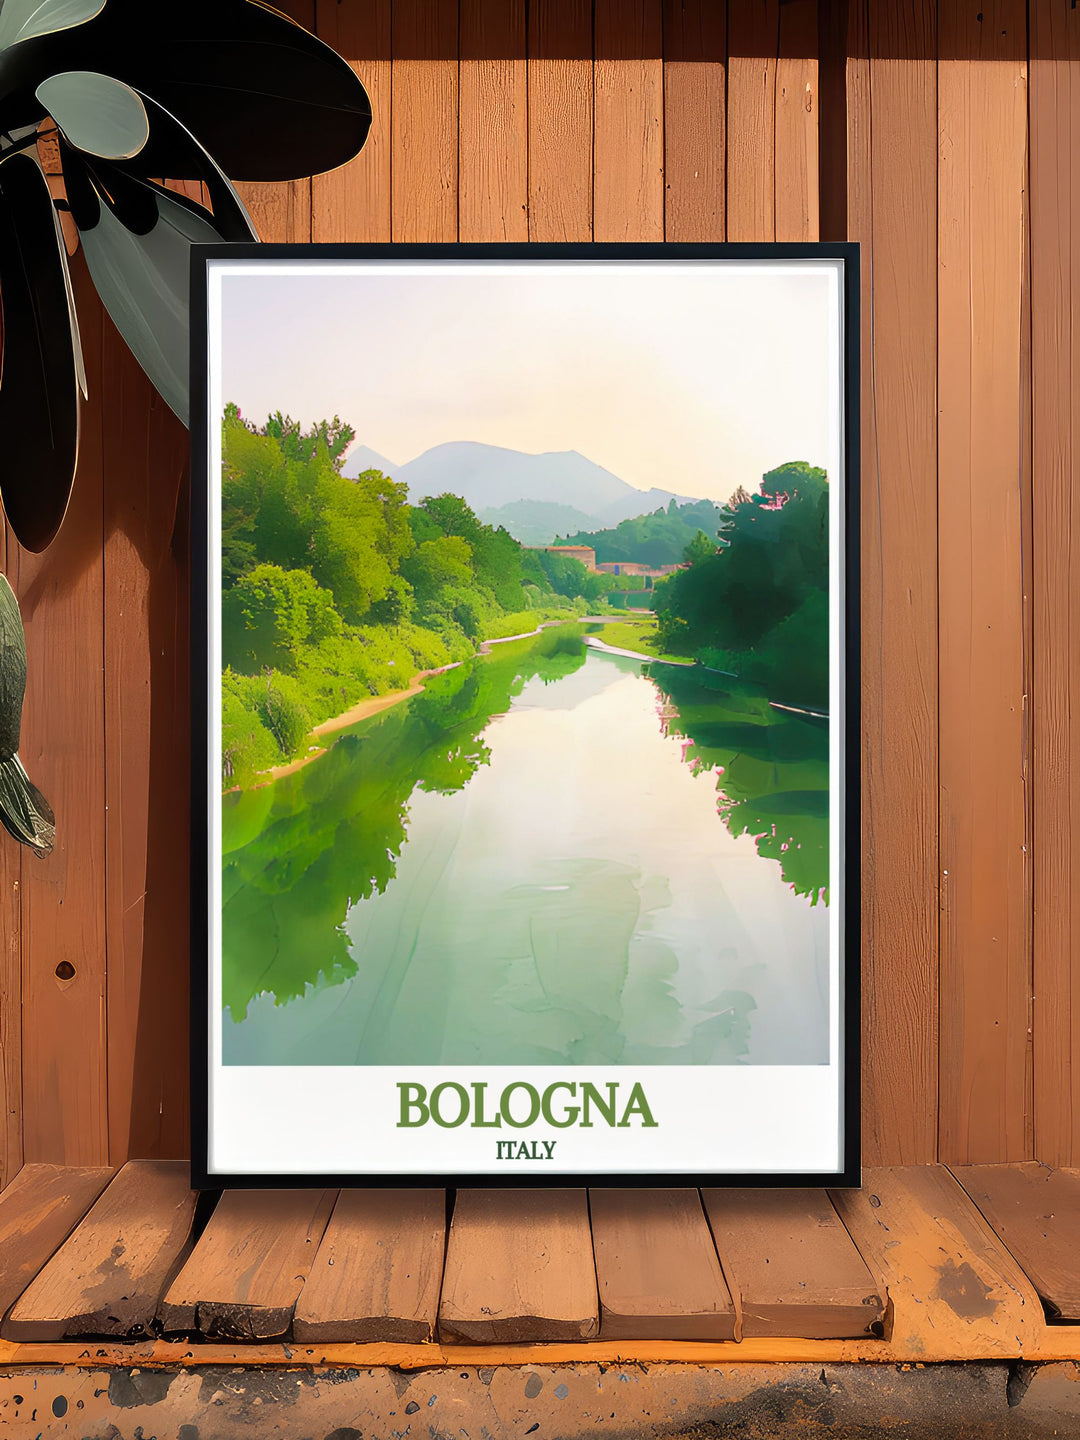 High quality print of Bolognas medieval architecture and the peaceful Reno River, capturing the essence of this unique Italian region. Ideal for art lovers who appreciate both history and nature.